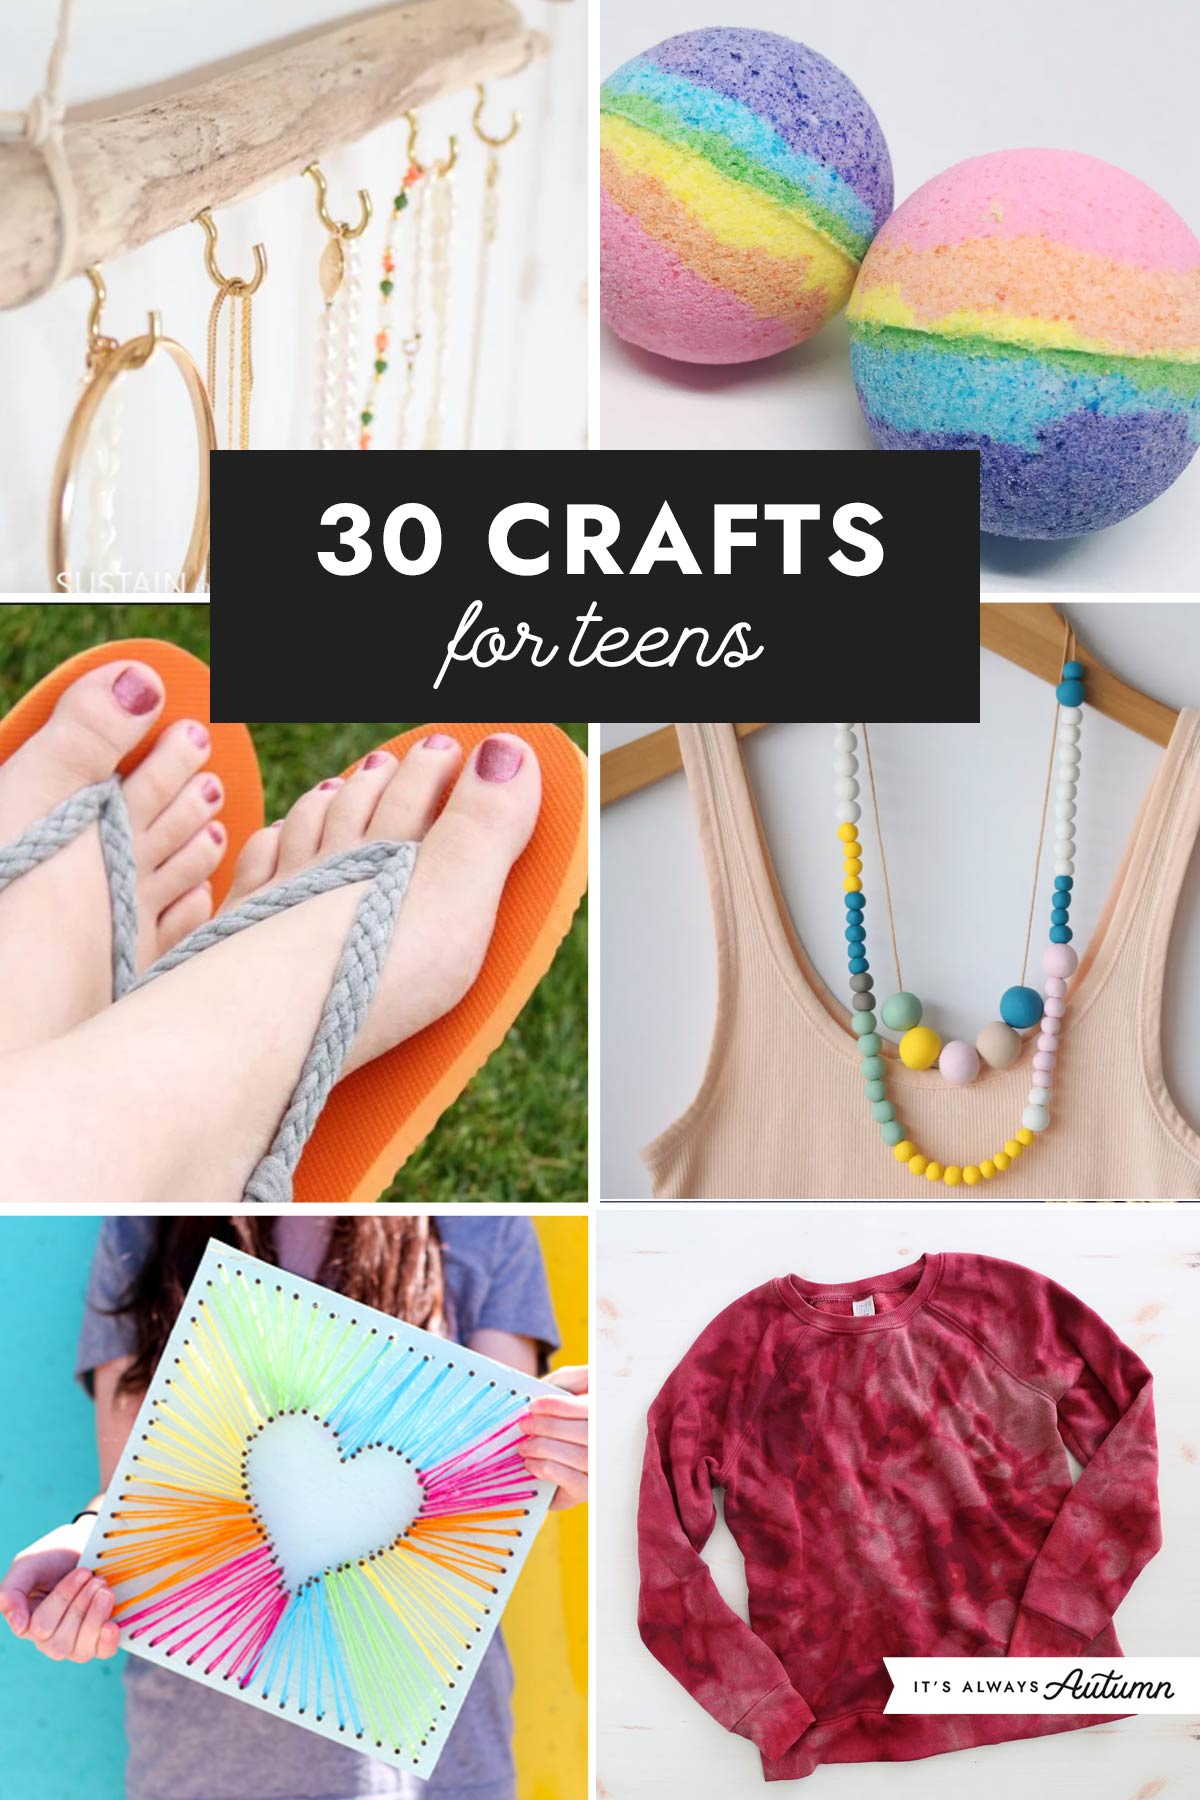 37 Cute Crafts for Girls You Must Try - Craftsy Hacks